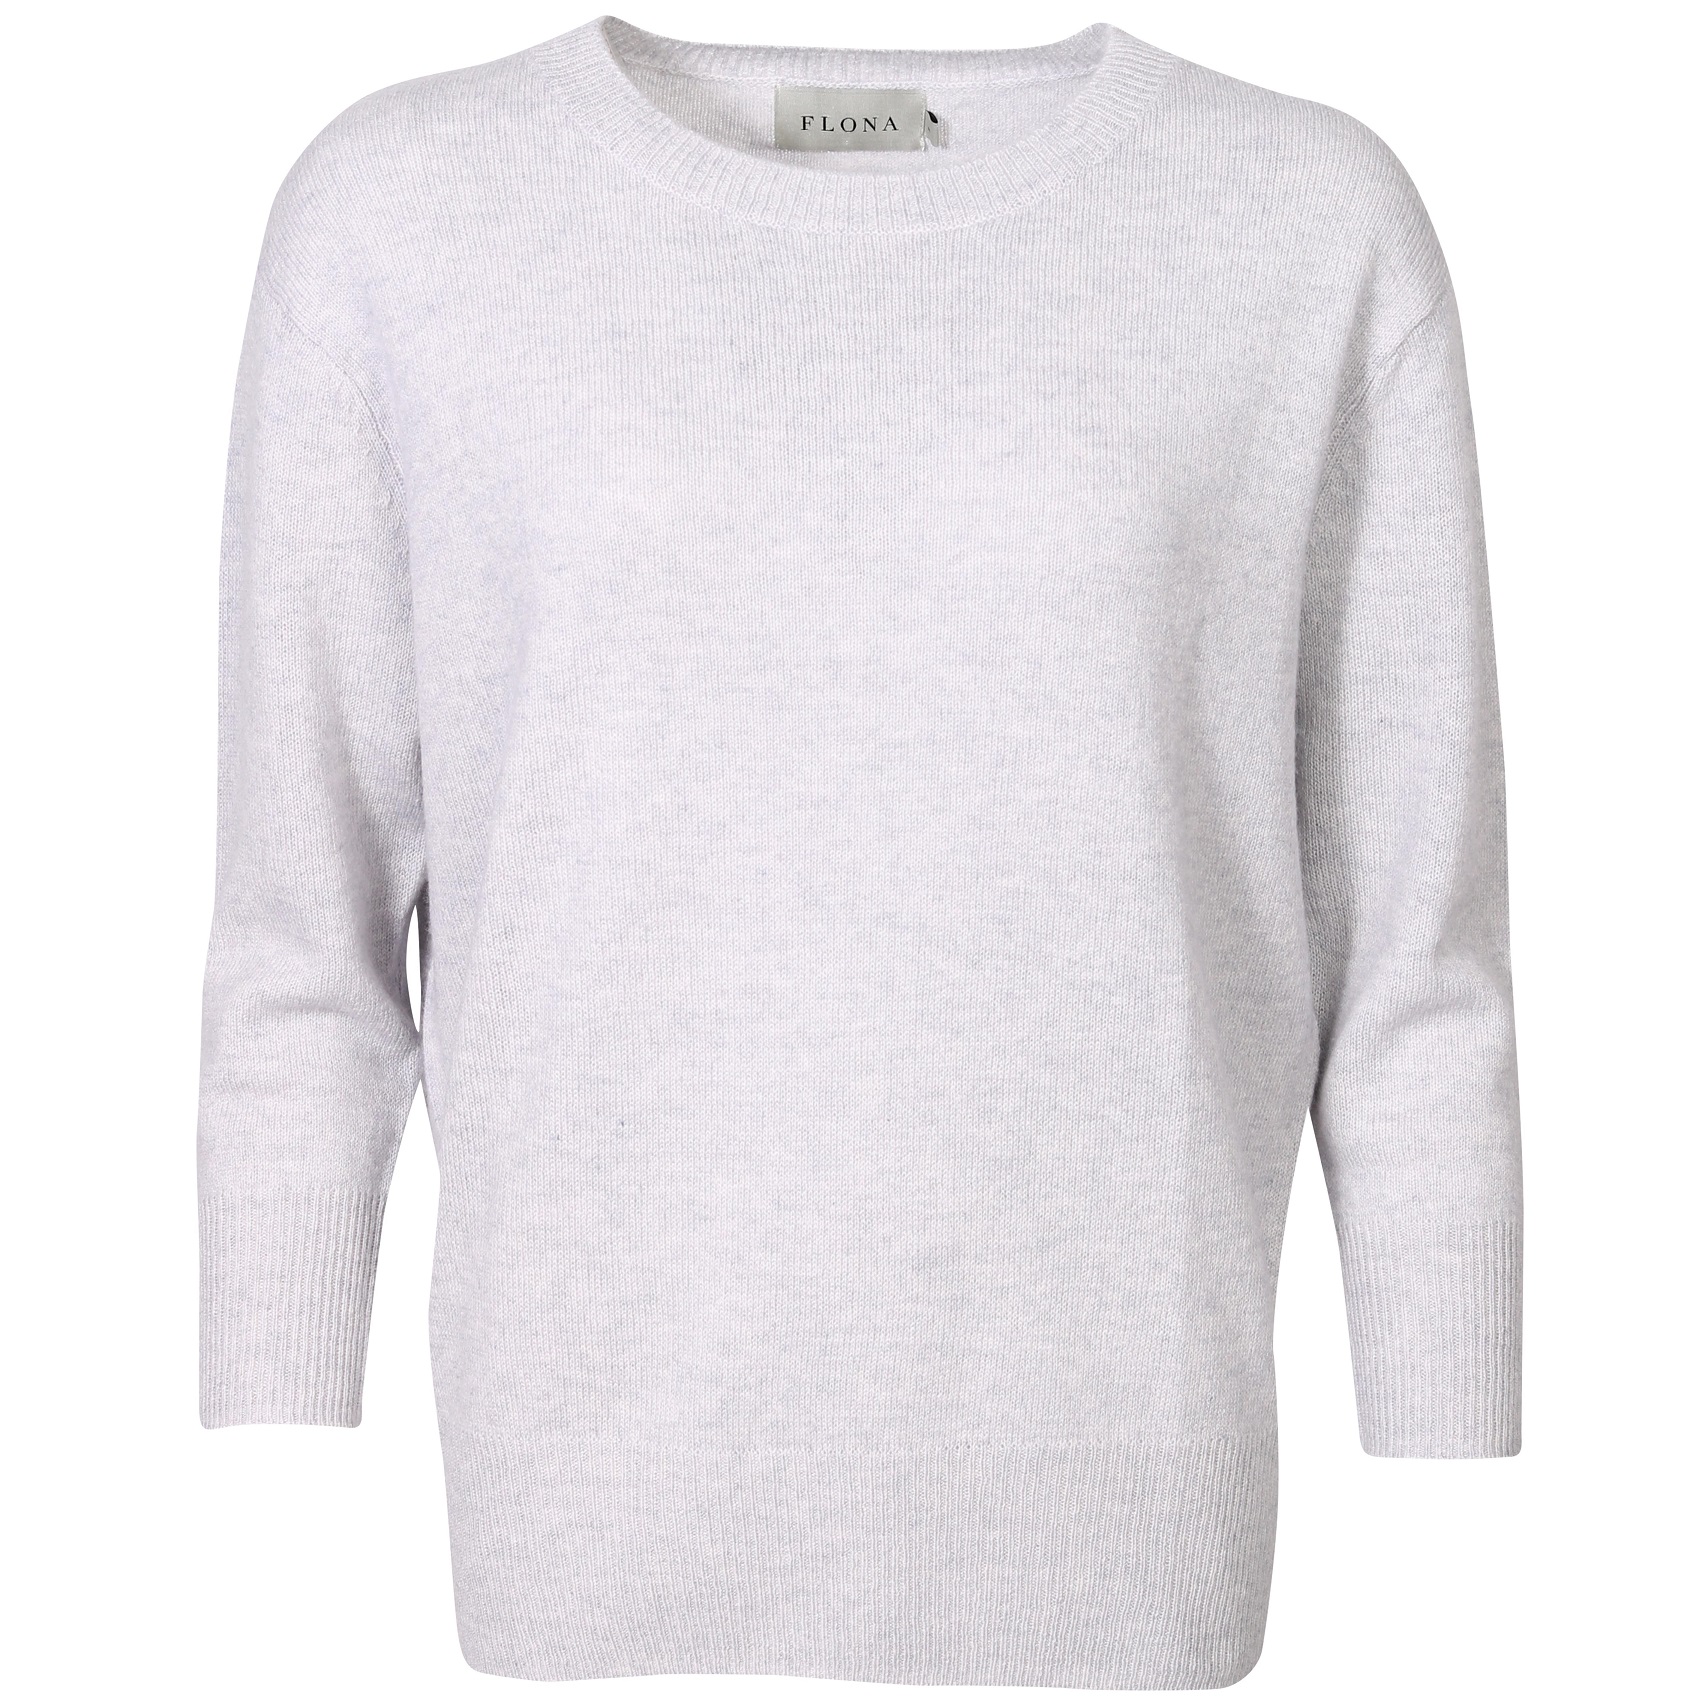 FLONA Cashmere Pullover in Light Grey M